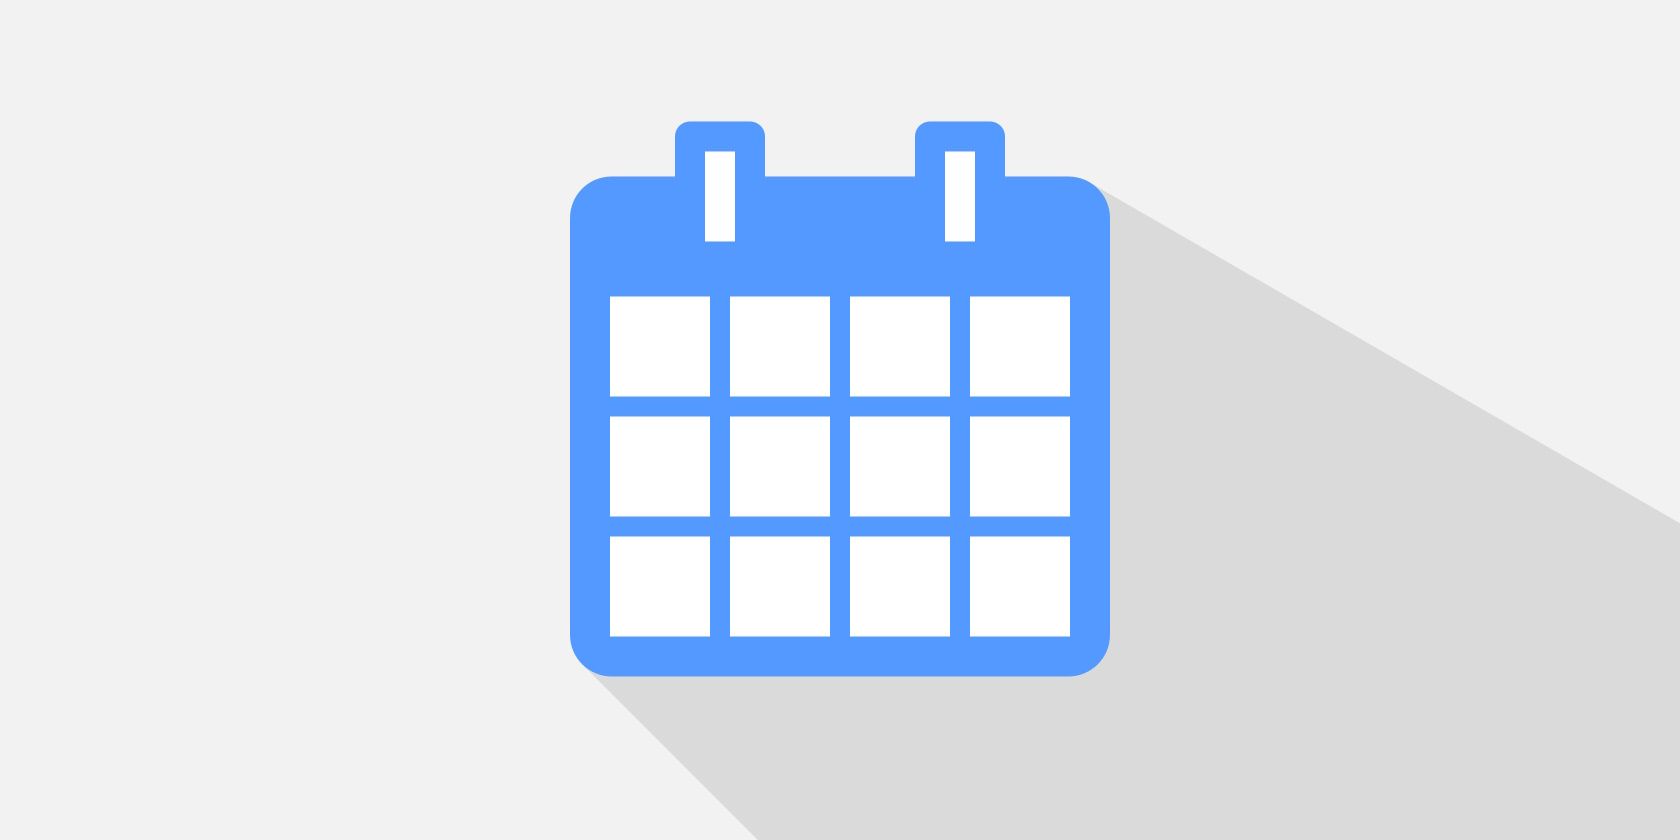 Blue calendar vector graphic against gray background